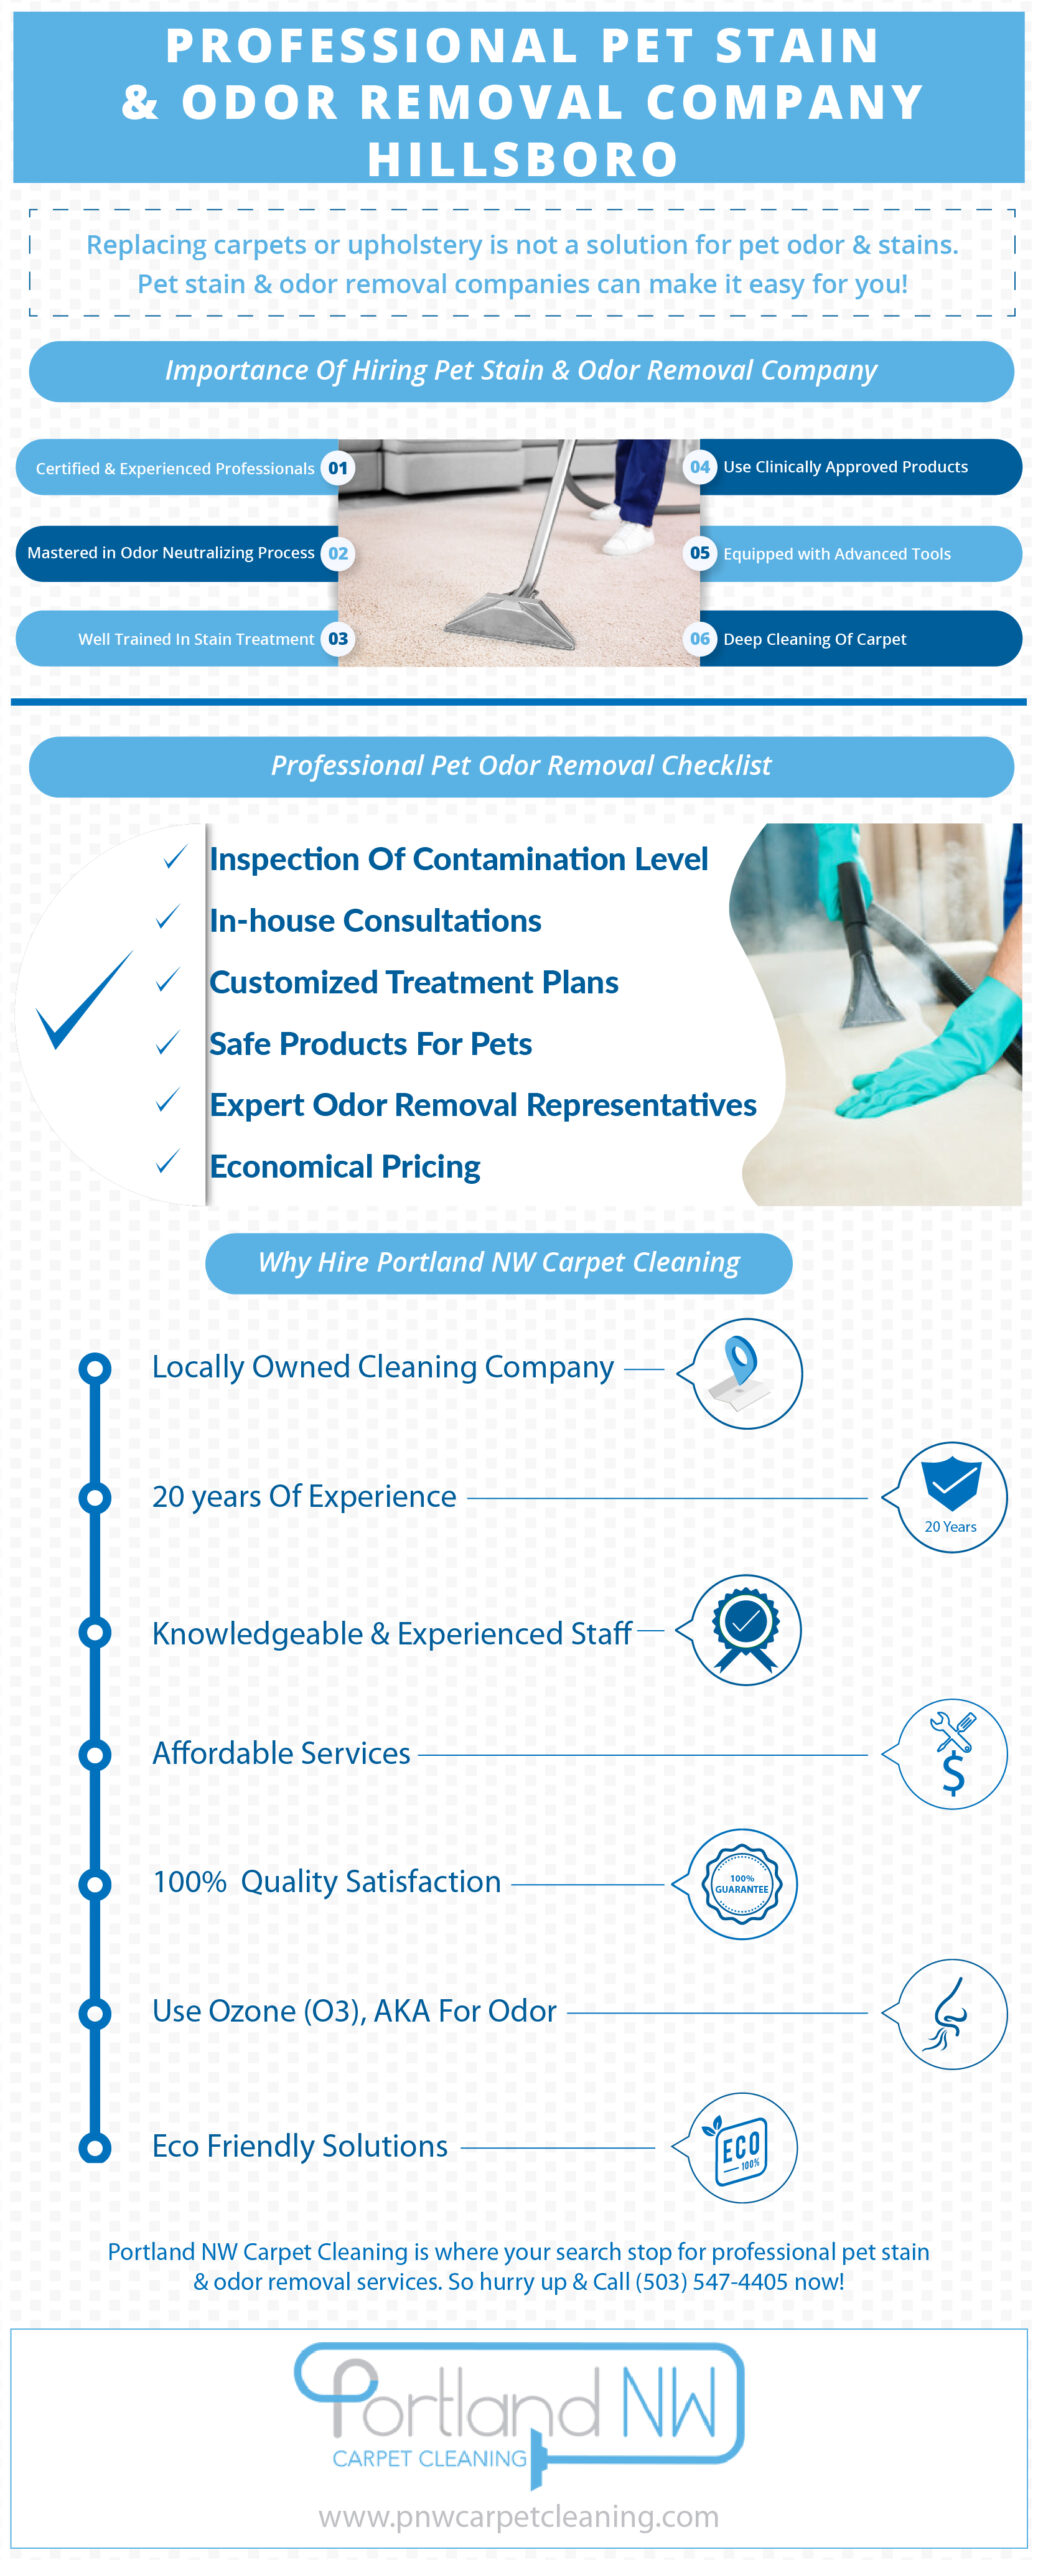 Professional Pet Stain & Odor Removal Company Hillsboro [Infographic]